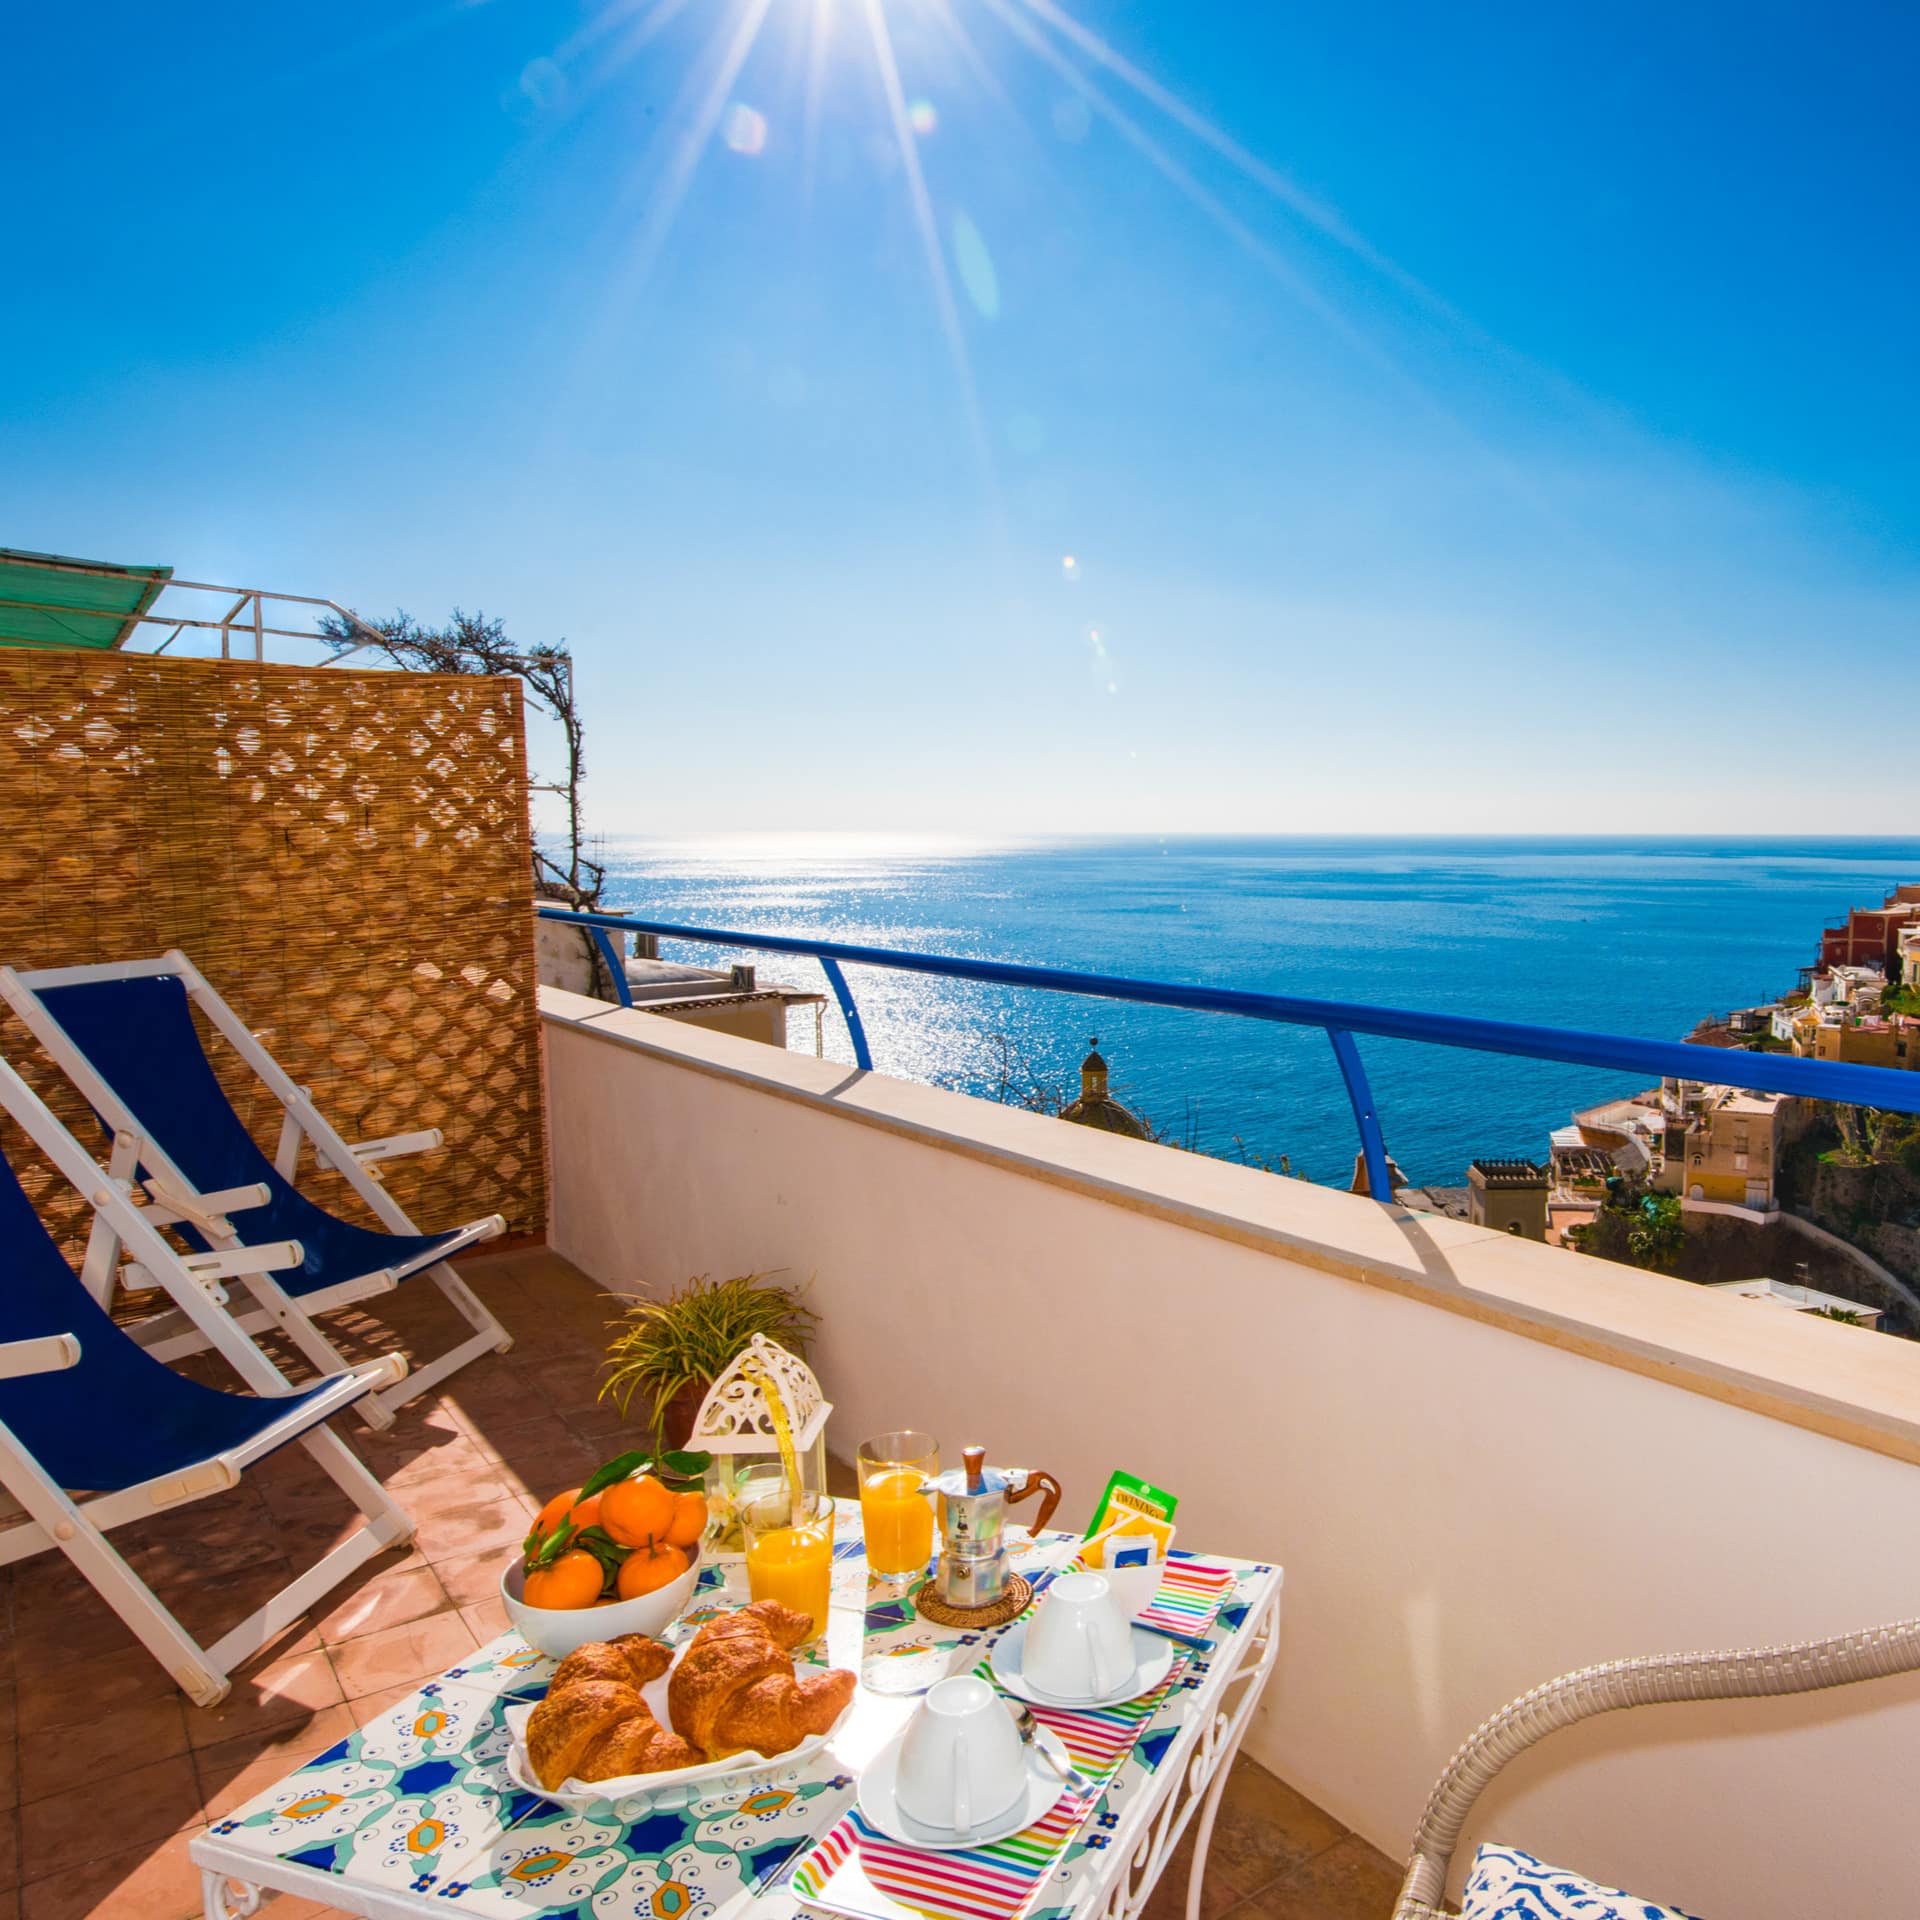 A typical balcony along the Amalfi coast, with a sumptuous Mediterranean breakfast and sea views